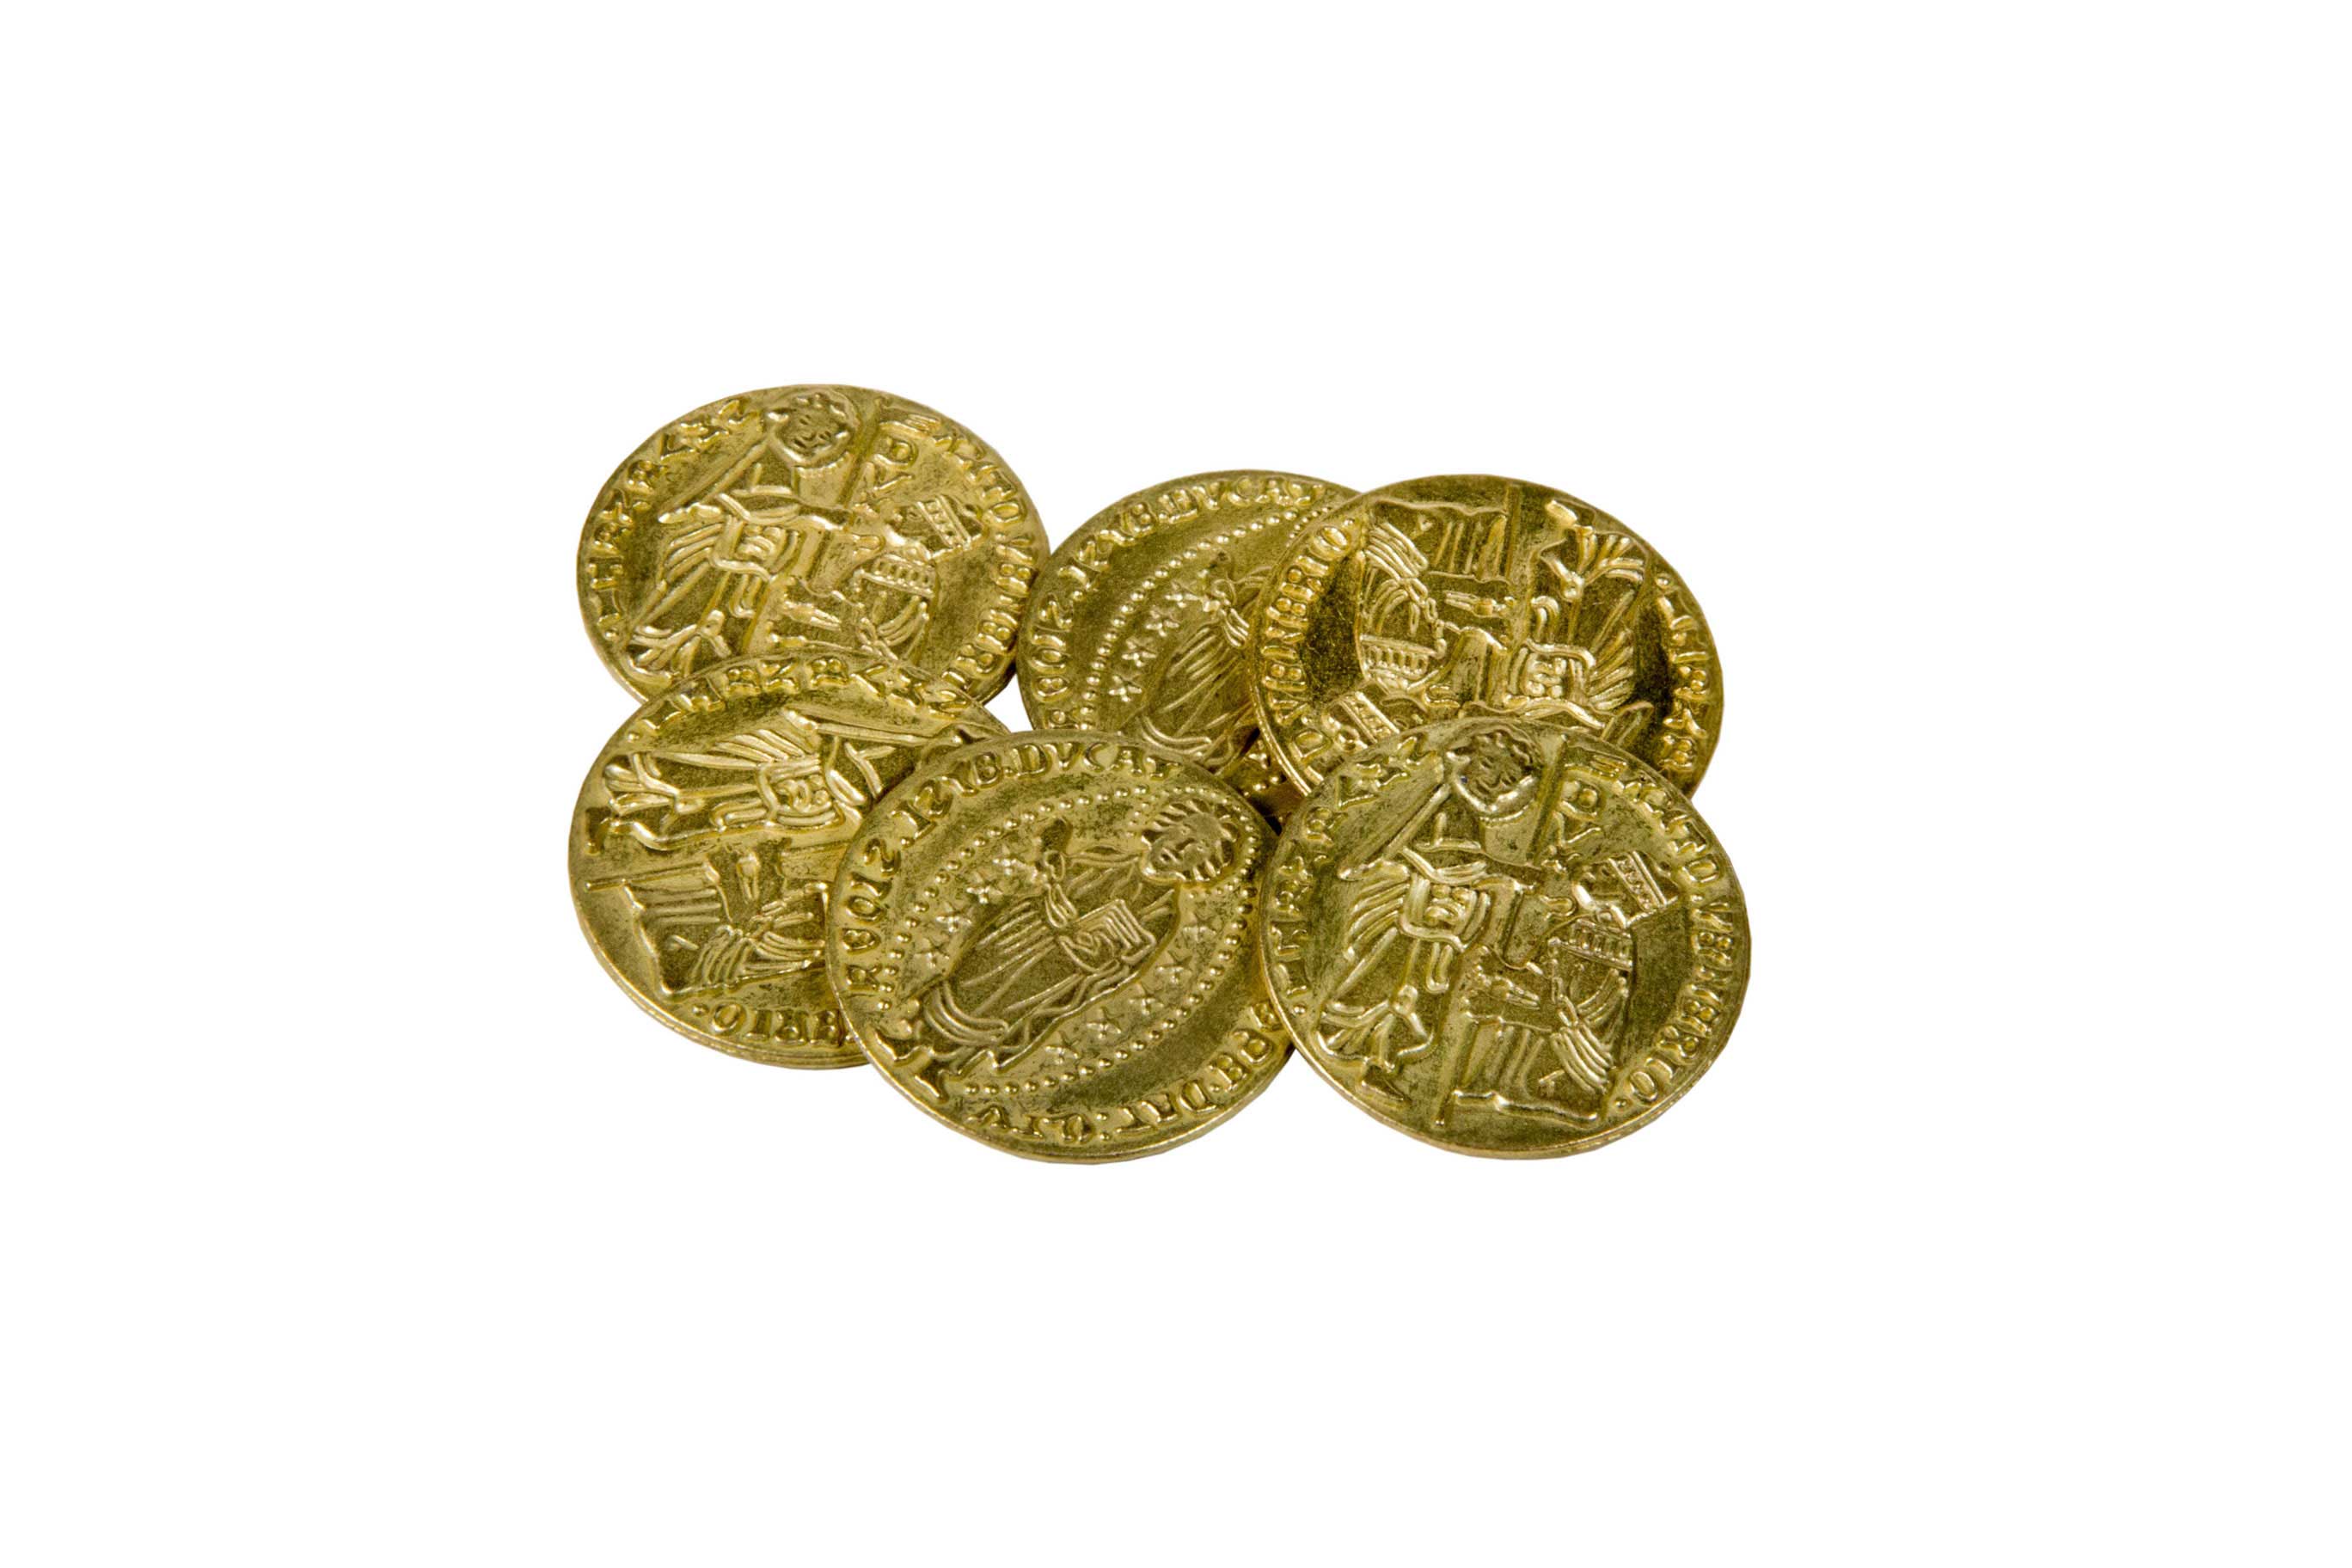 Giochistarter: Historical metal coins, second wave